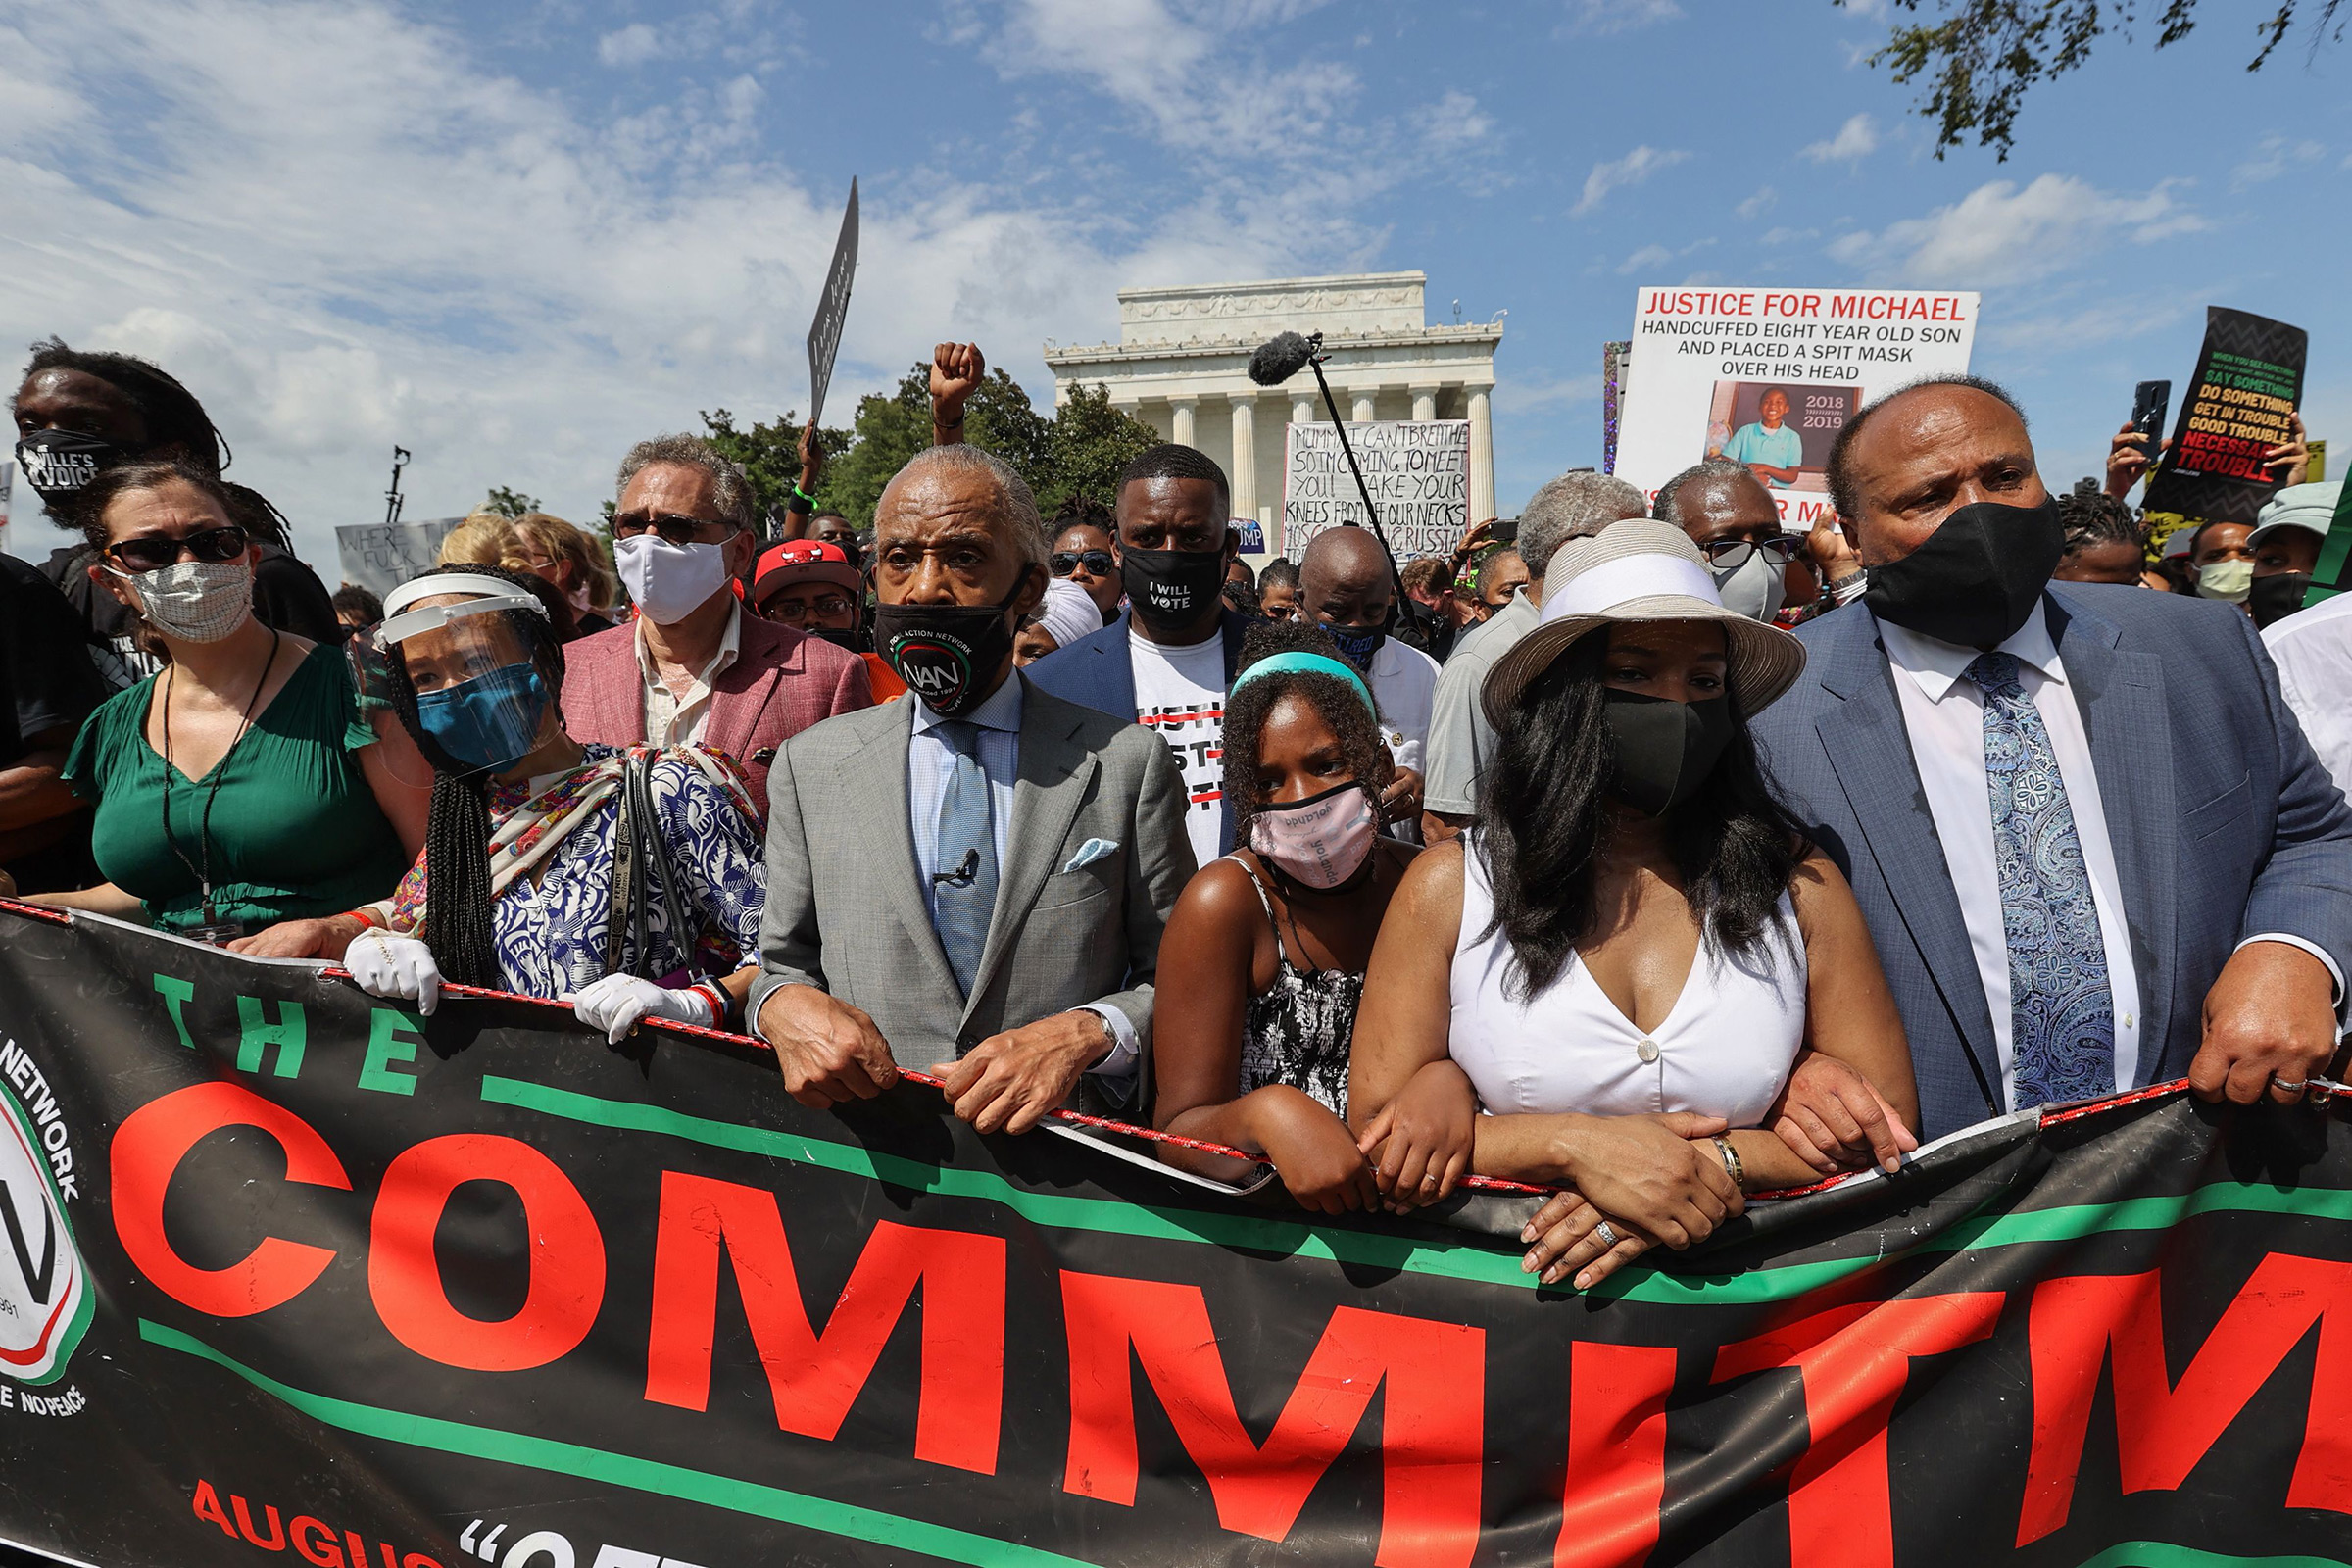 Rev. Al Sharpton, center, marches next to Yolanda King, Andrea Waters King and Martin Luther King, III during the "Commitment March: Get Your Knee Off Our Necks" protest against racism and police brutality, in Washington, D.C., on Aug. 28, 2020. (Jonathan Ernst—Pool/AFP/Getty Images)